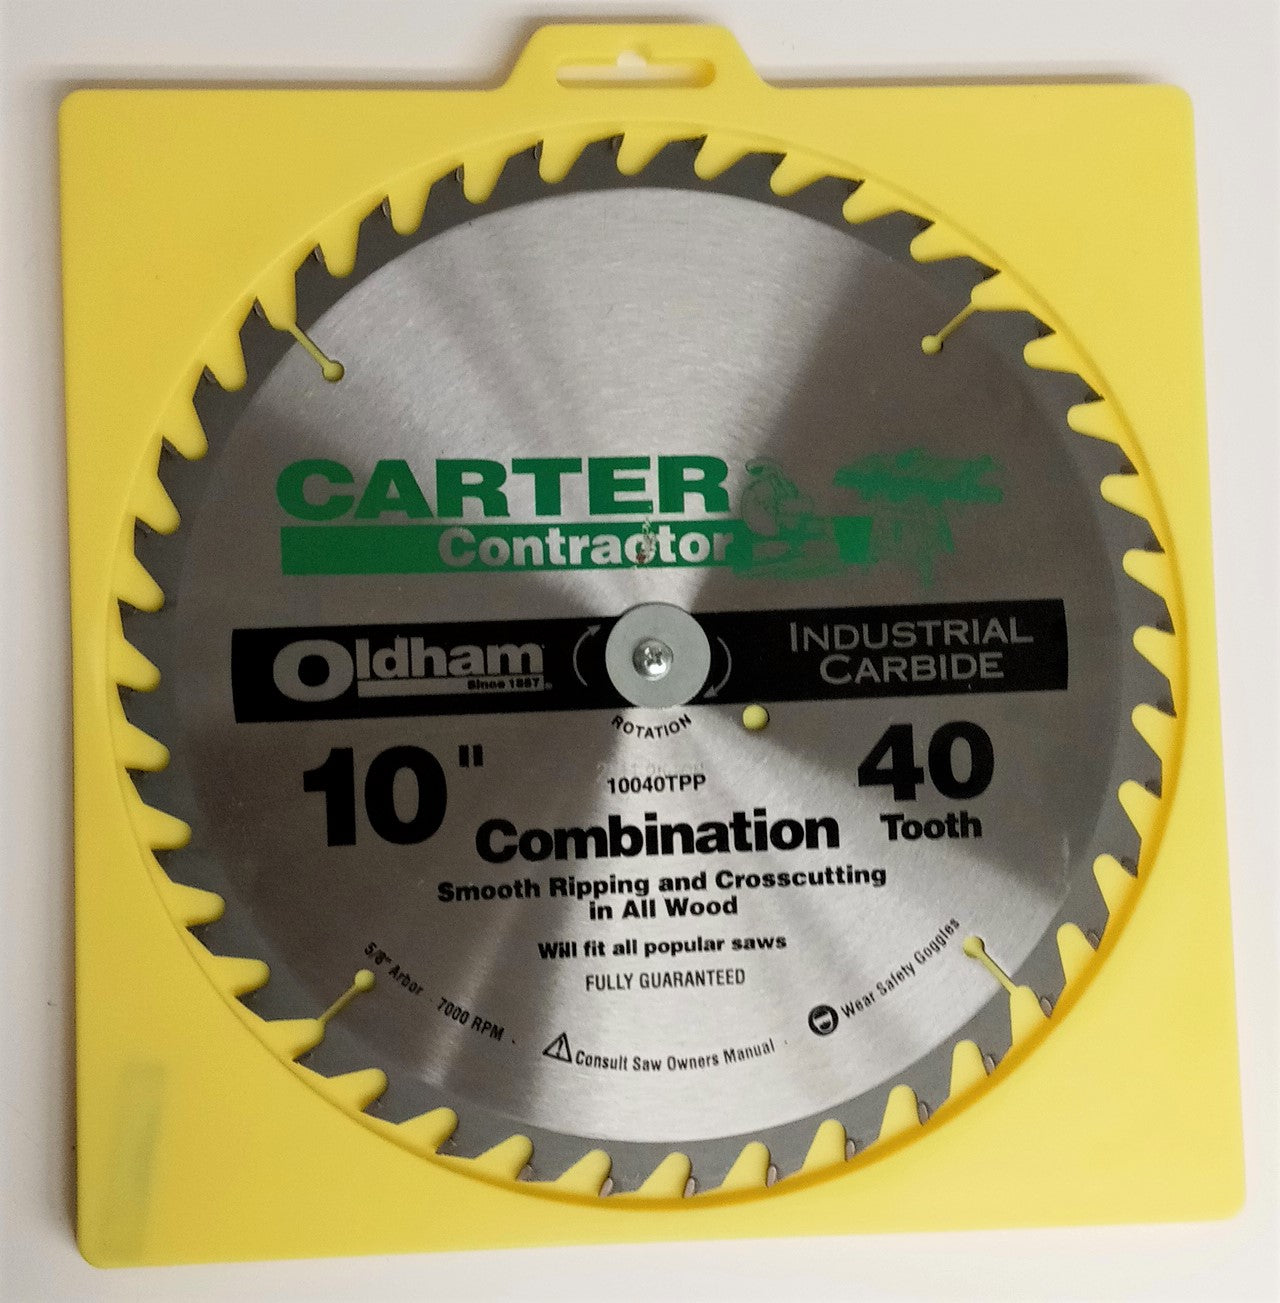 Oldham 10040TPP 10" x 40 Tooth Crosscutting Ripping Carbide Circular Saw Blade